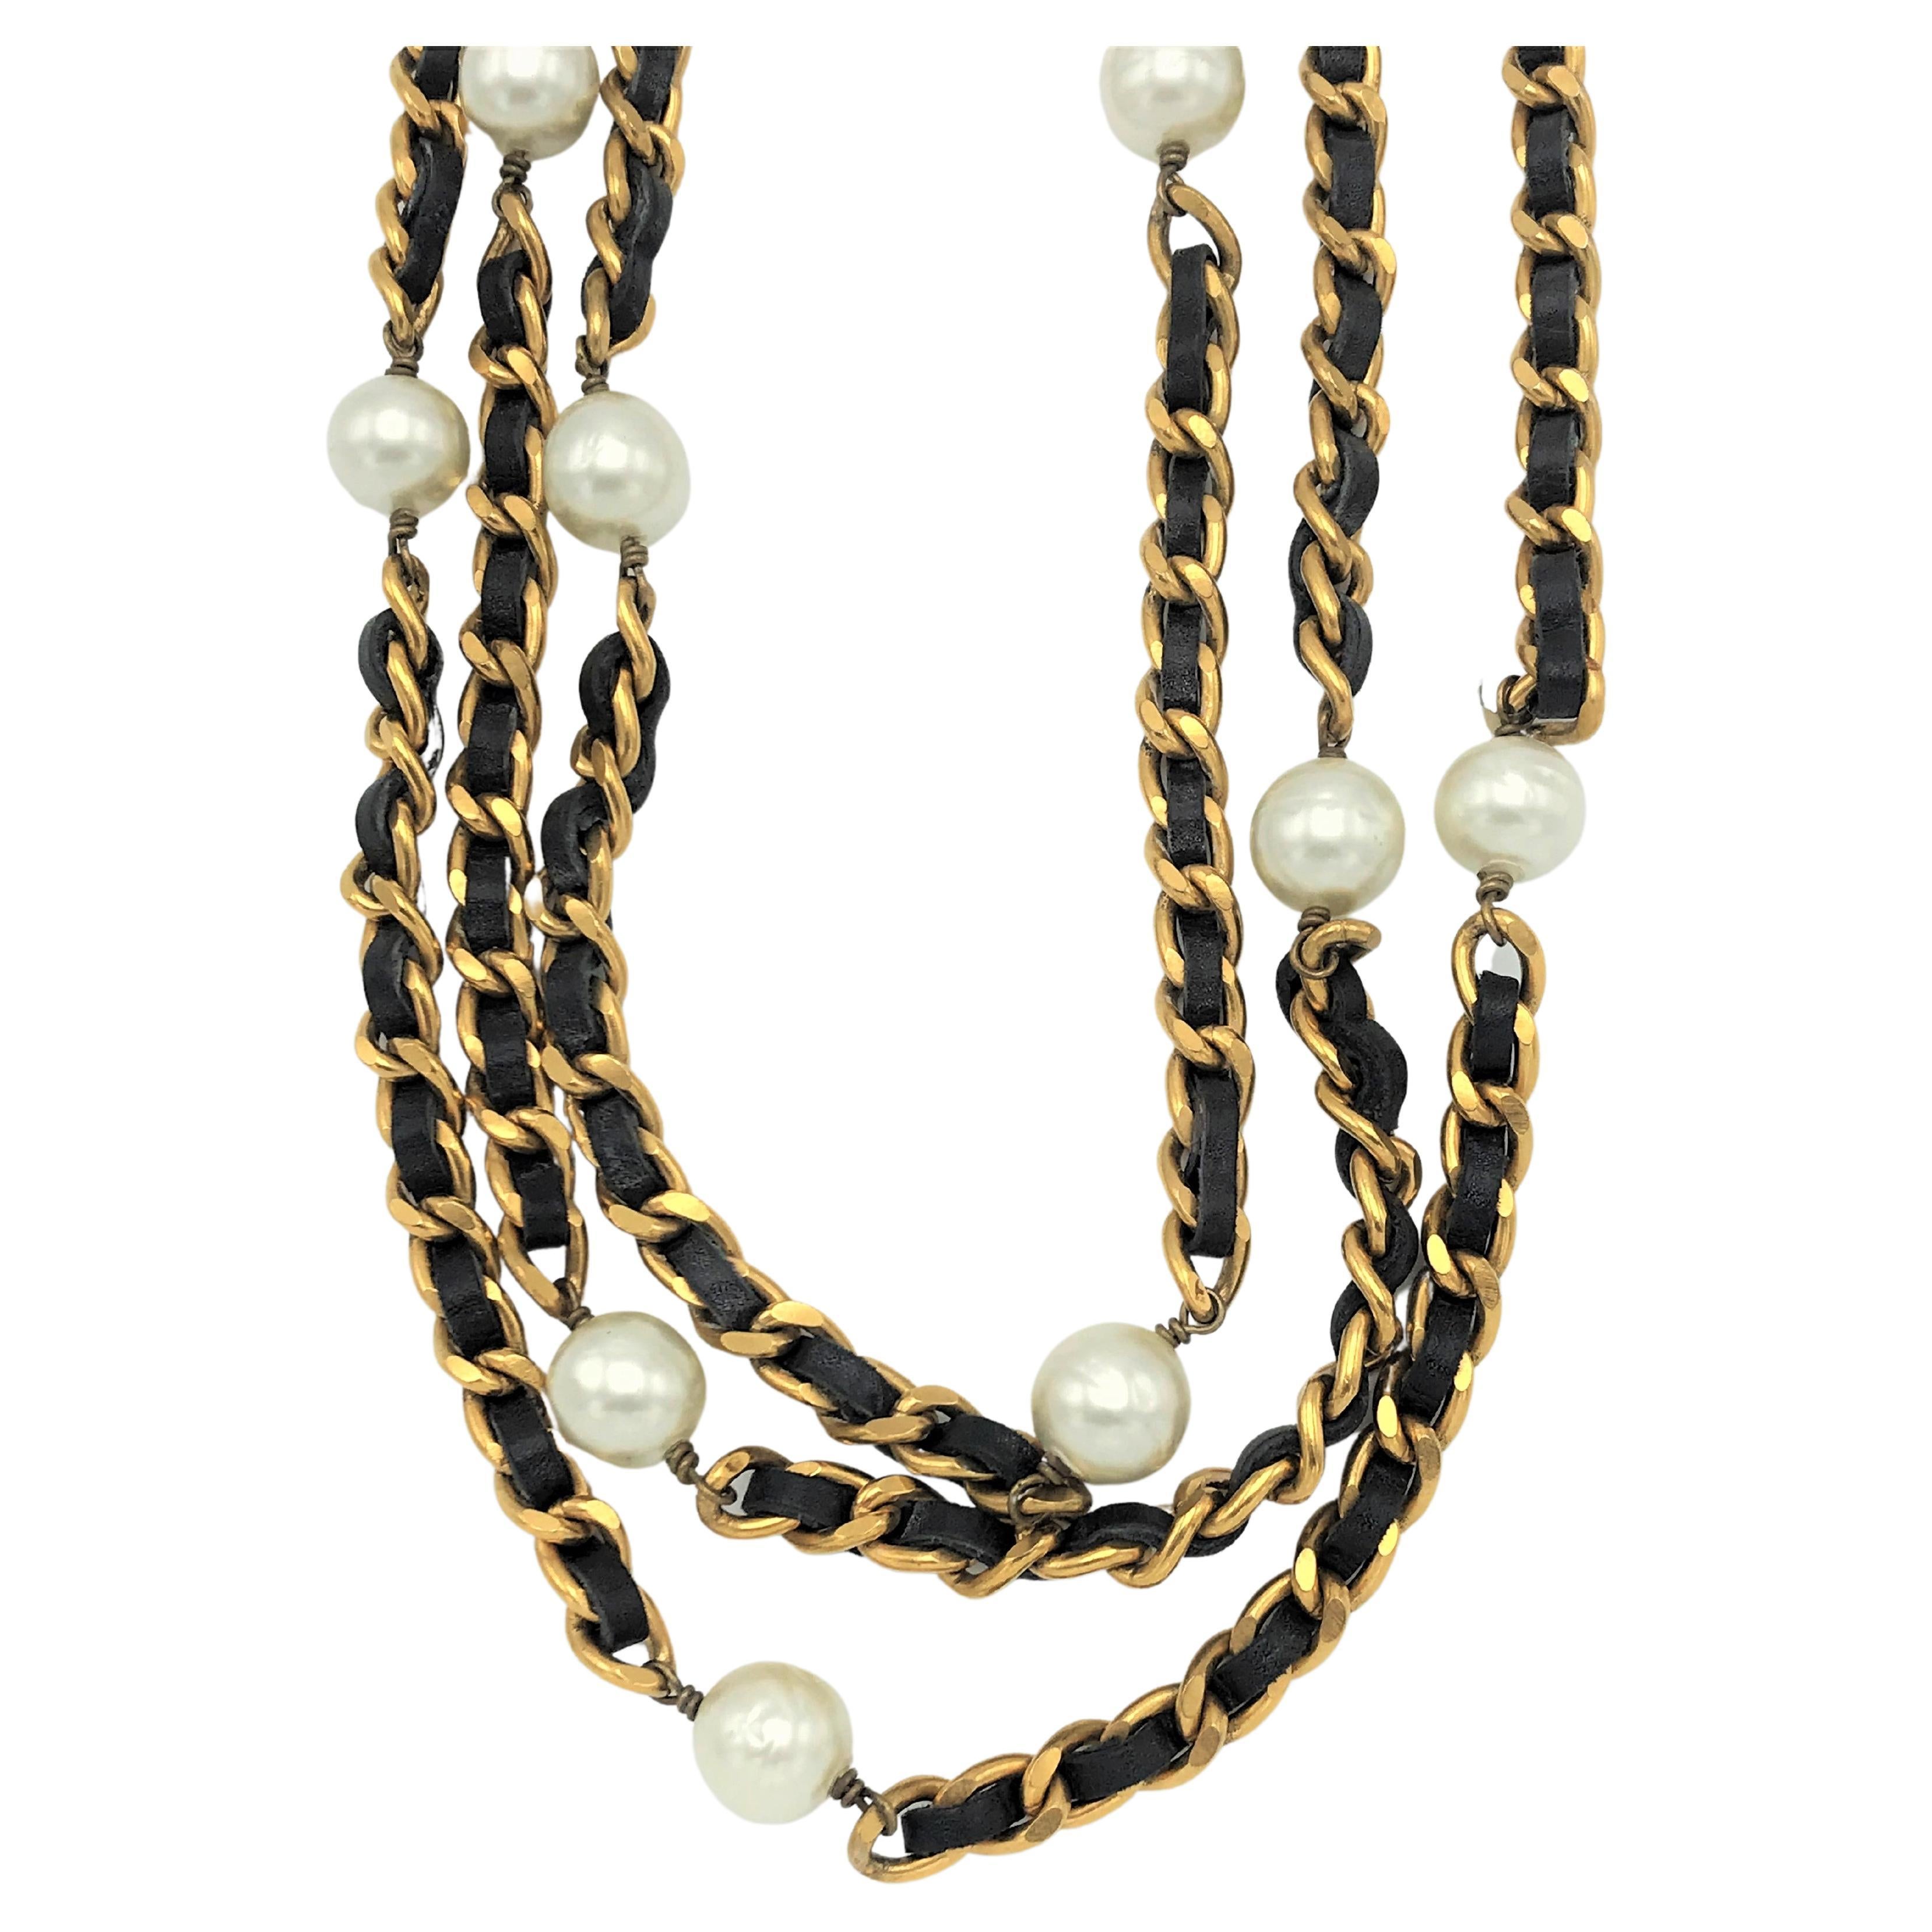 An Iconic Chain with leather woven throughout and Chanel pearls. There are 17 imitation Chanel pearls with a diameter of 1 cm. 
The necklace forms a perfect assemble to the earrings of Victoire de Castellane which I also offer. In addition, the